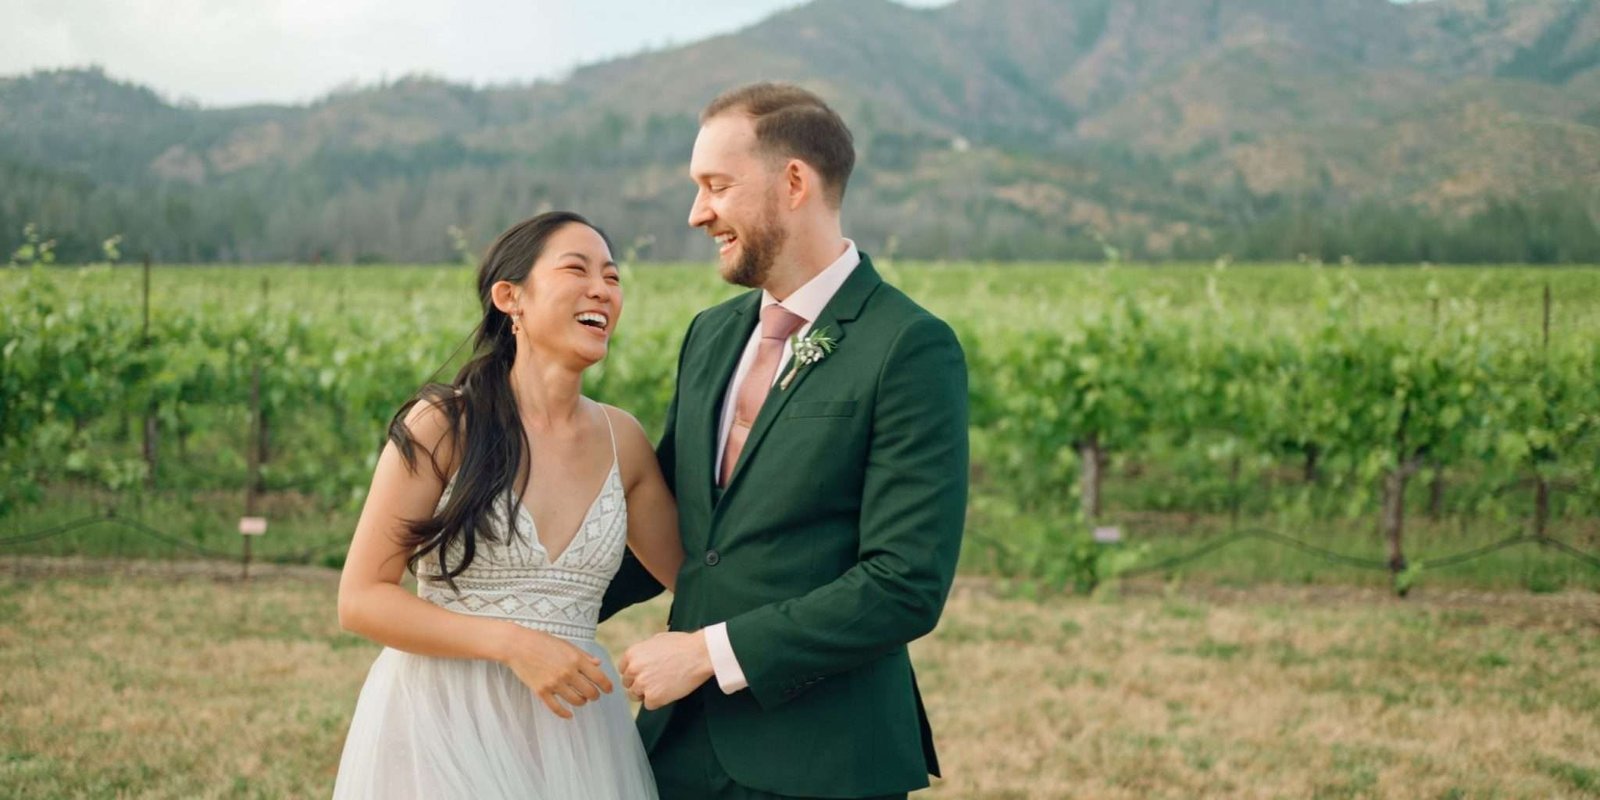 Playful newlywed couple embracing by the vineyard